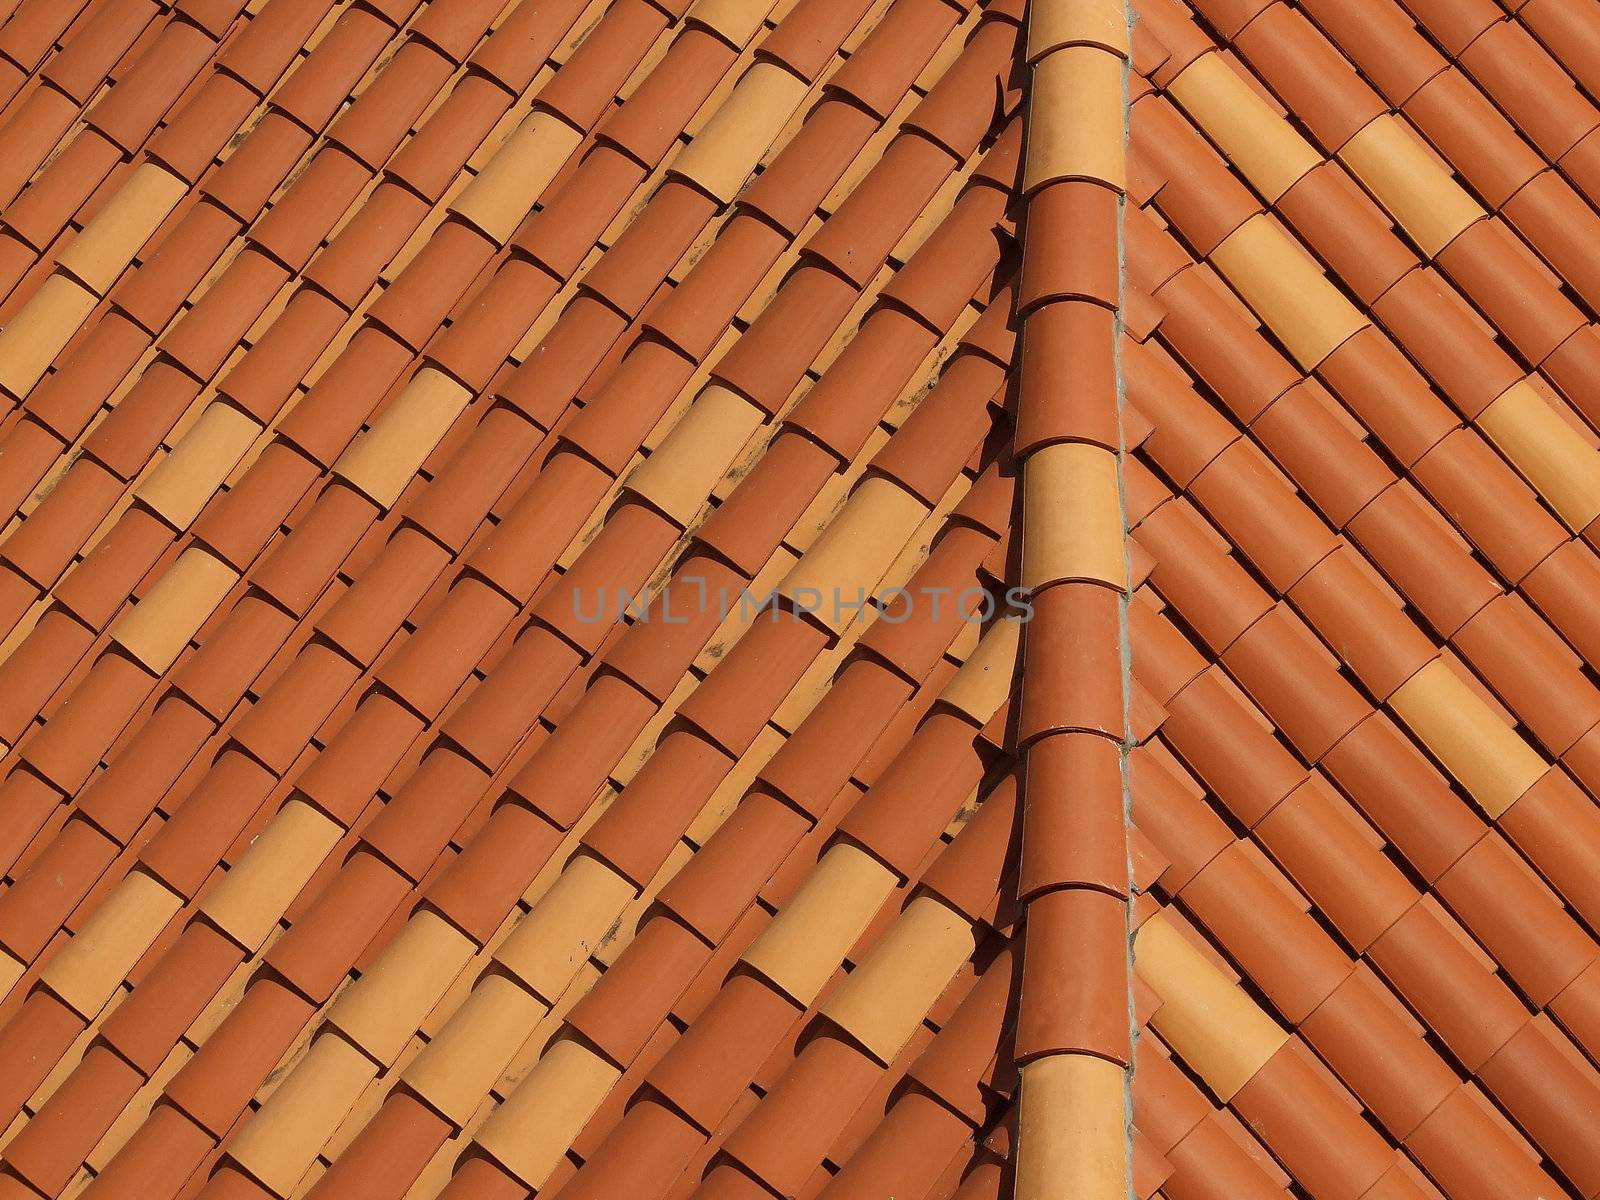 Rustic roof tiles, background by Gbuglok